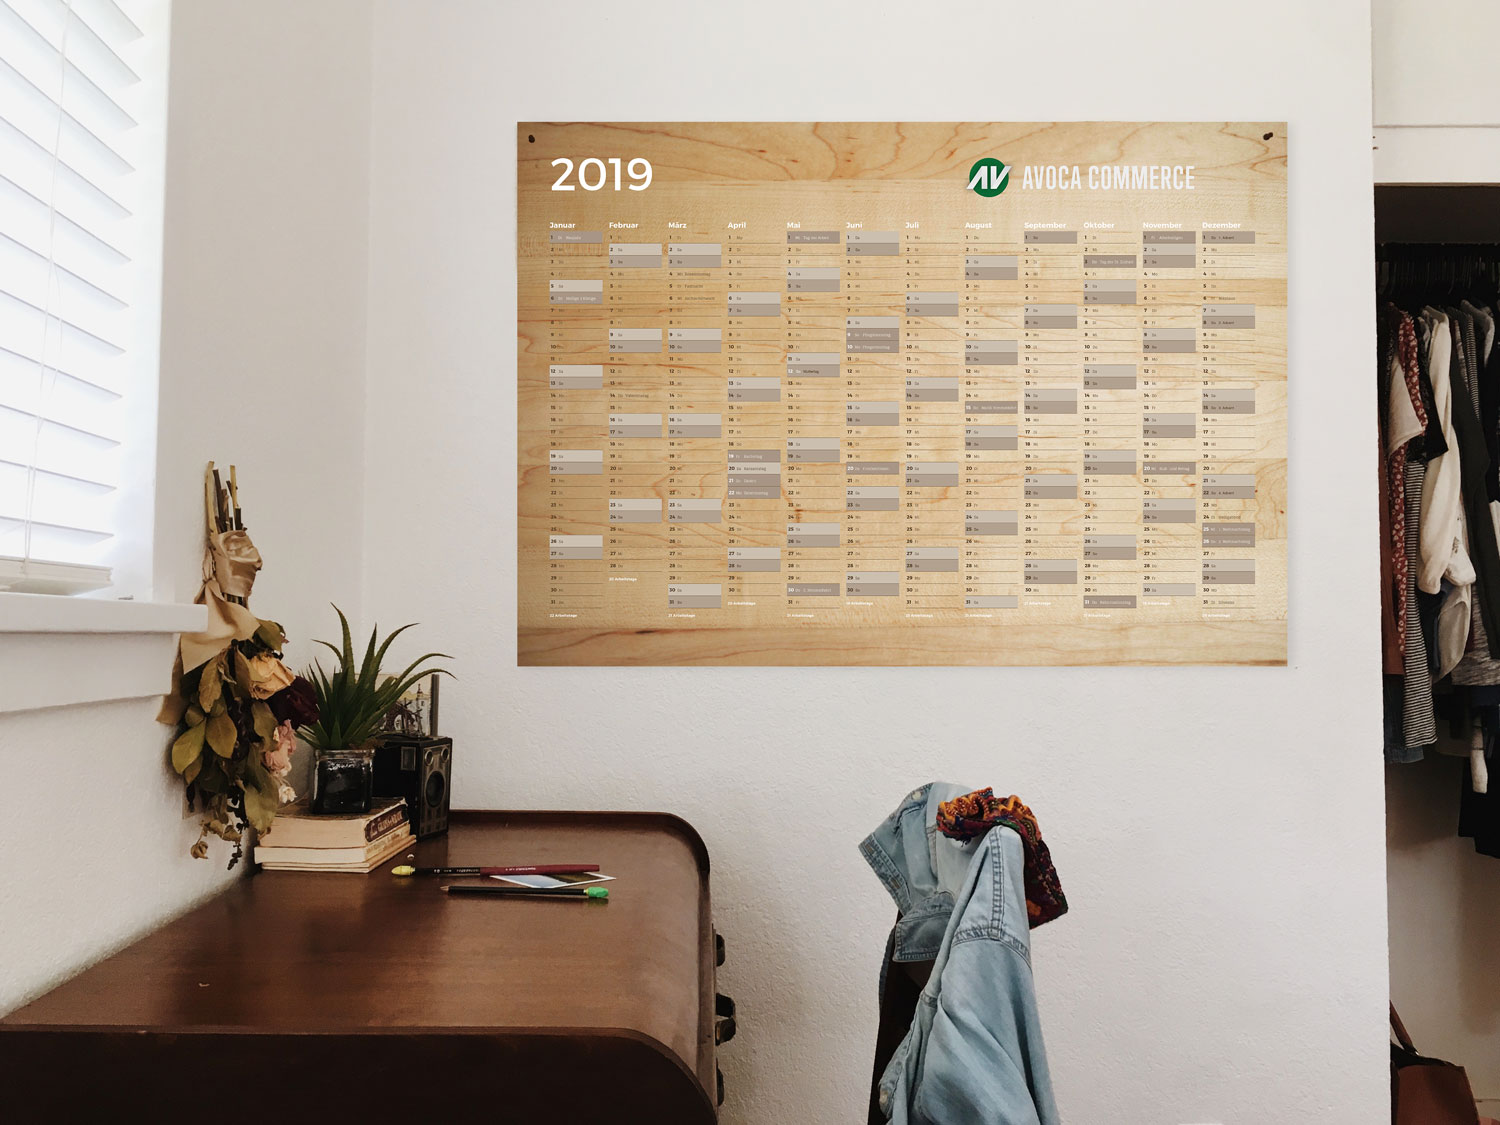 Year-round wall planner in German language. It was set in four colors and contains daily figures and designations as well as the number of working days per month.